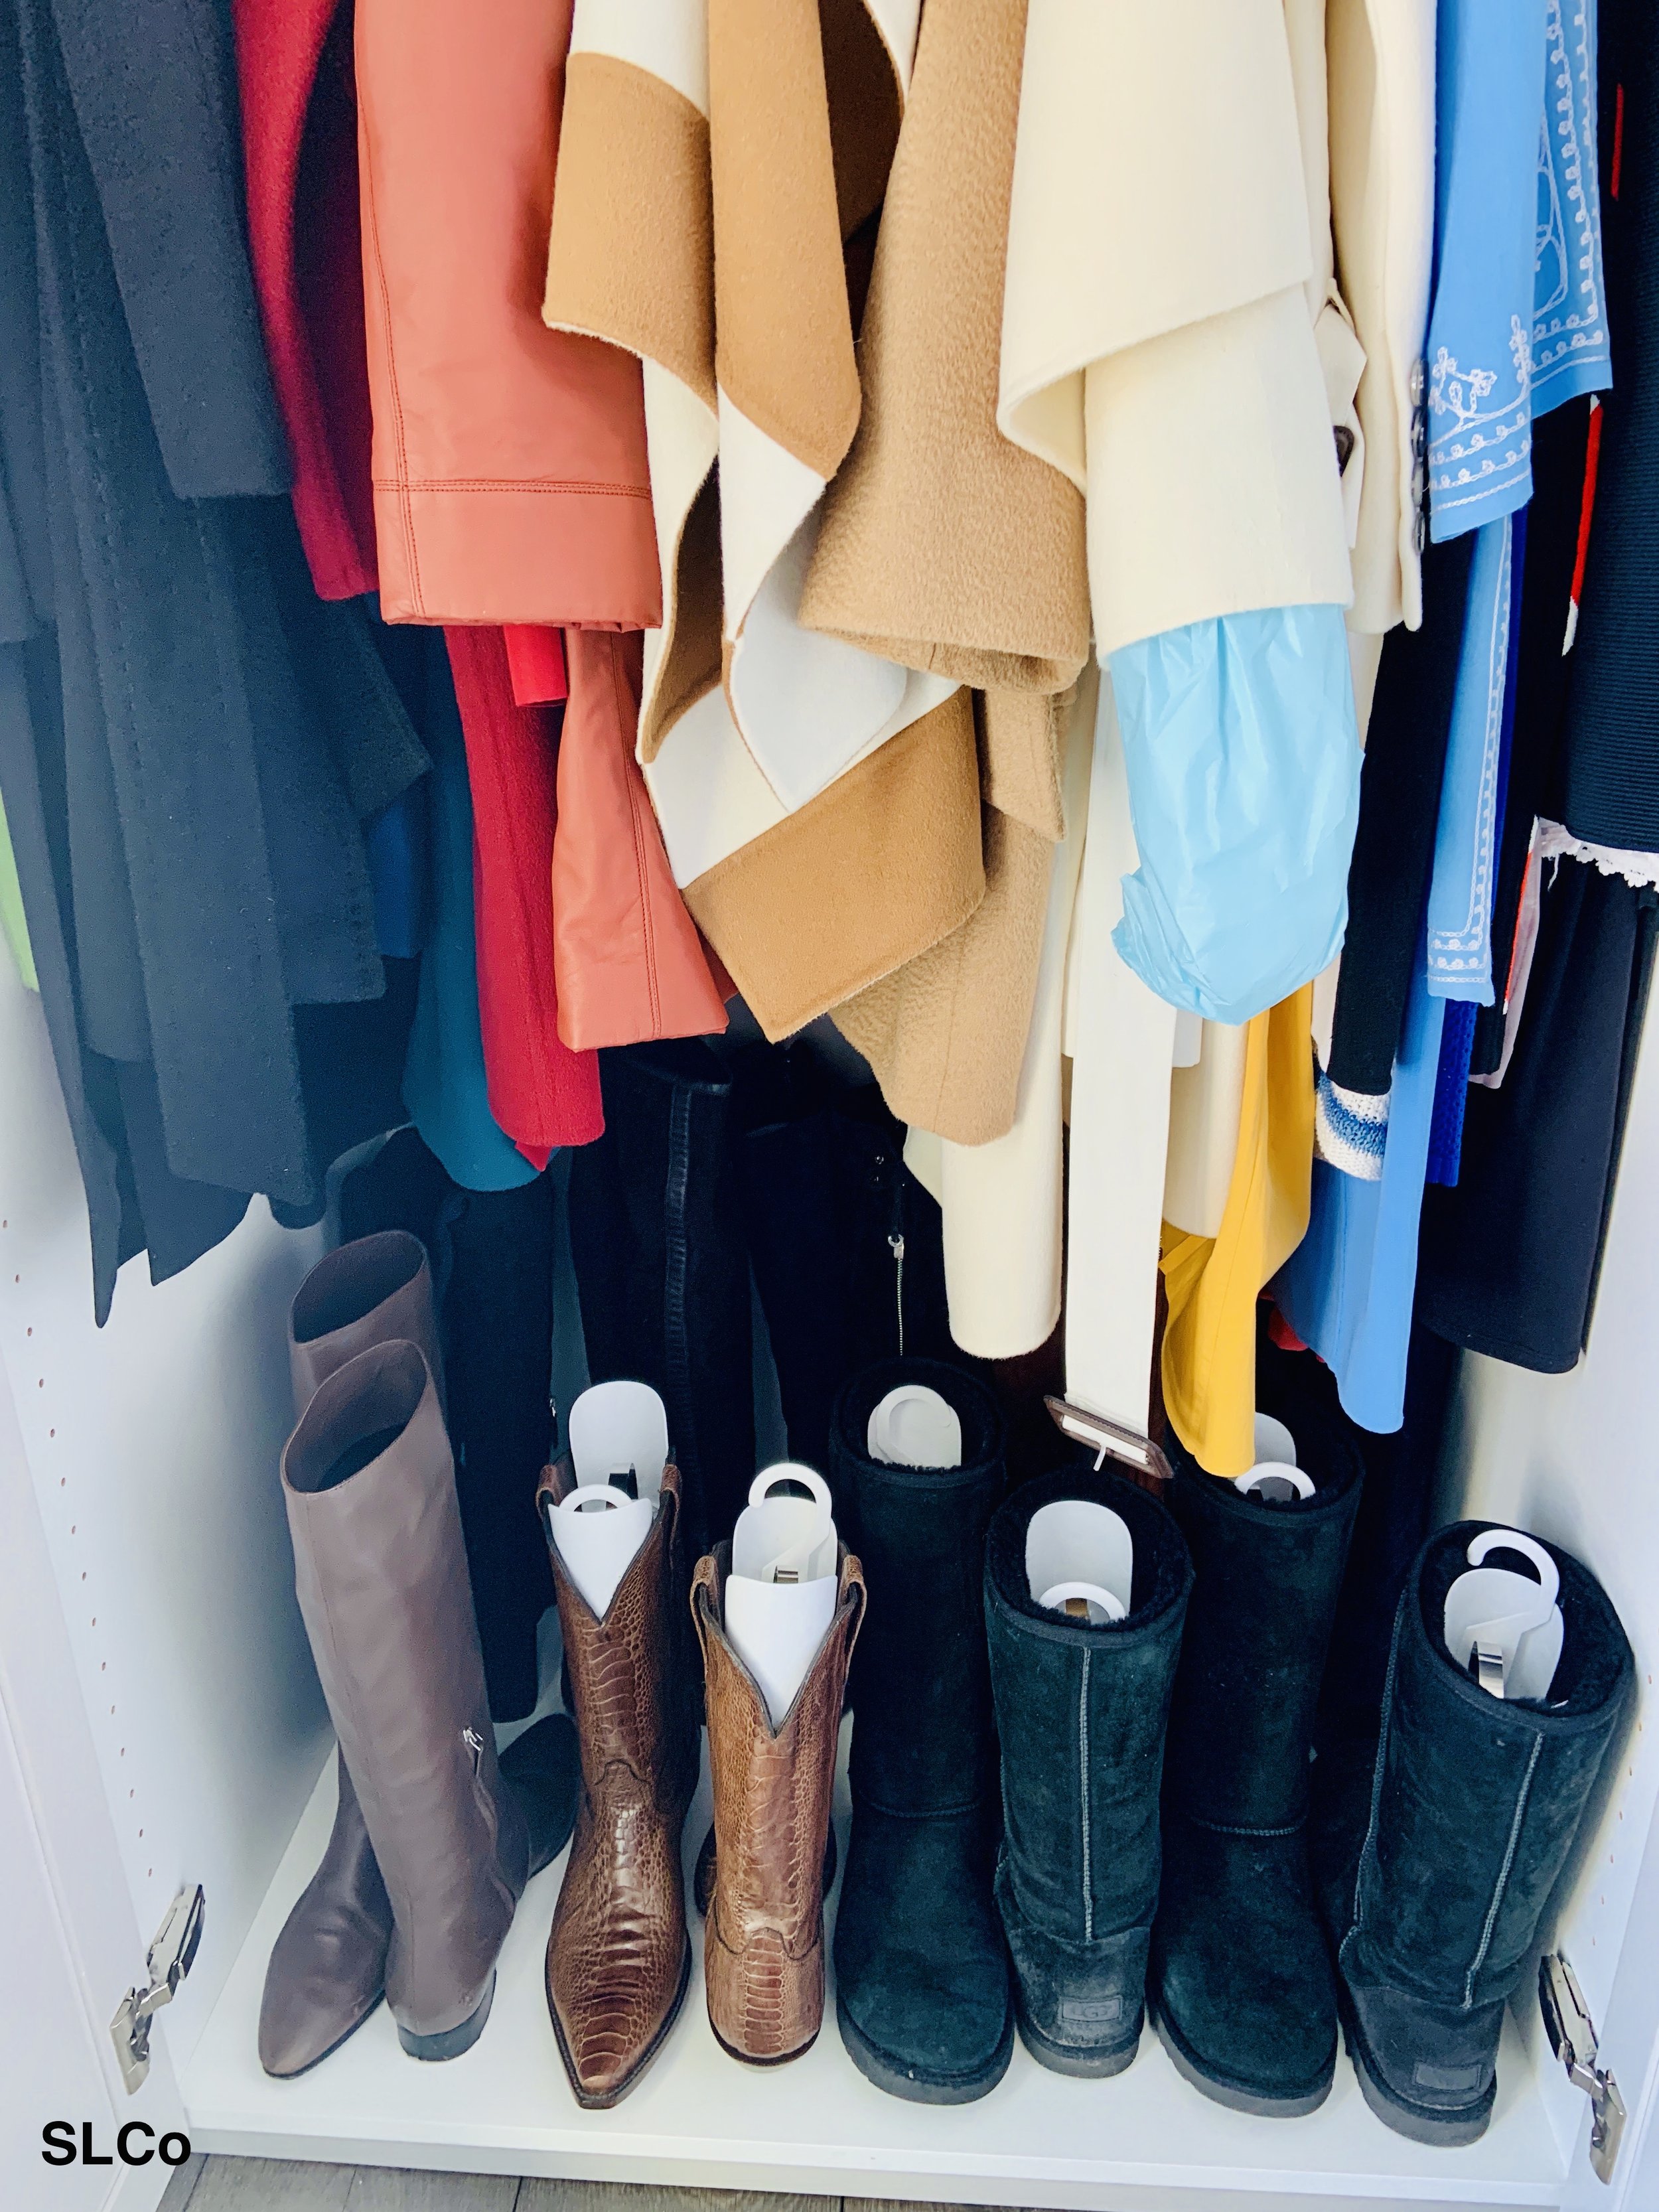 Clothes hanging in a small closet and tall boots on the bottom.